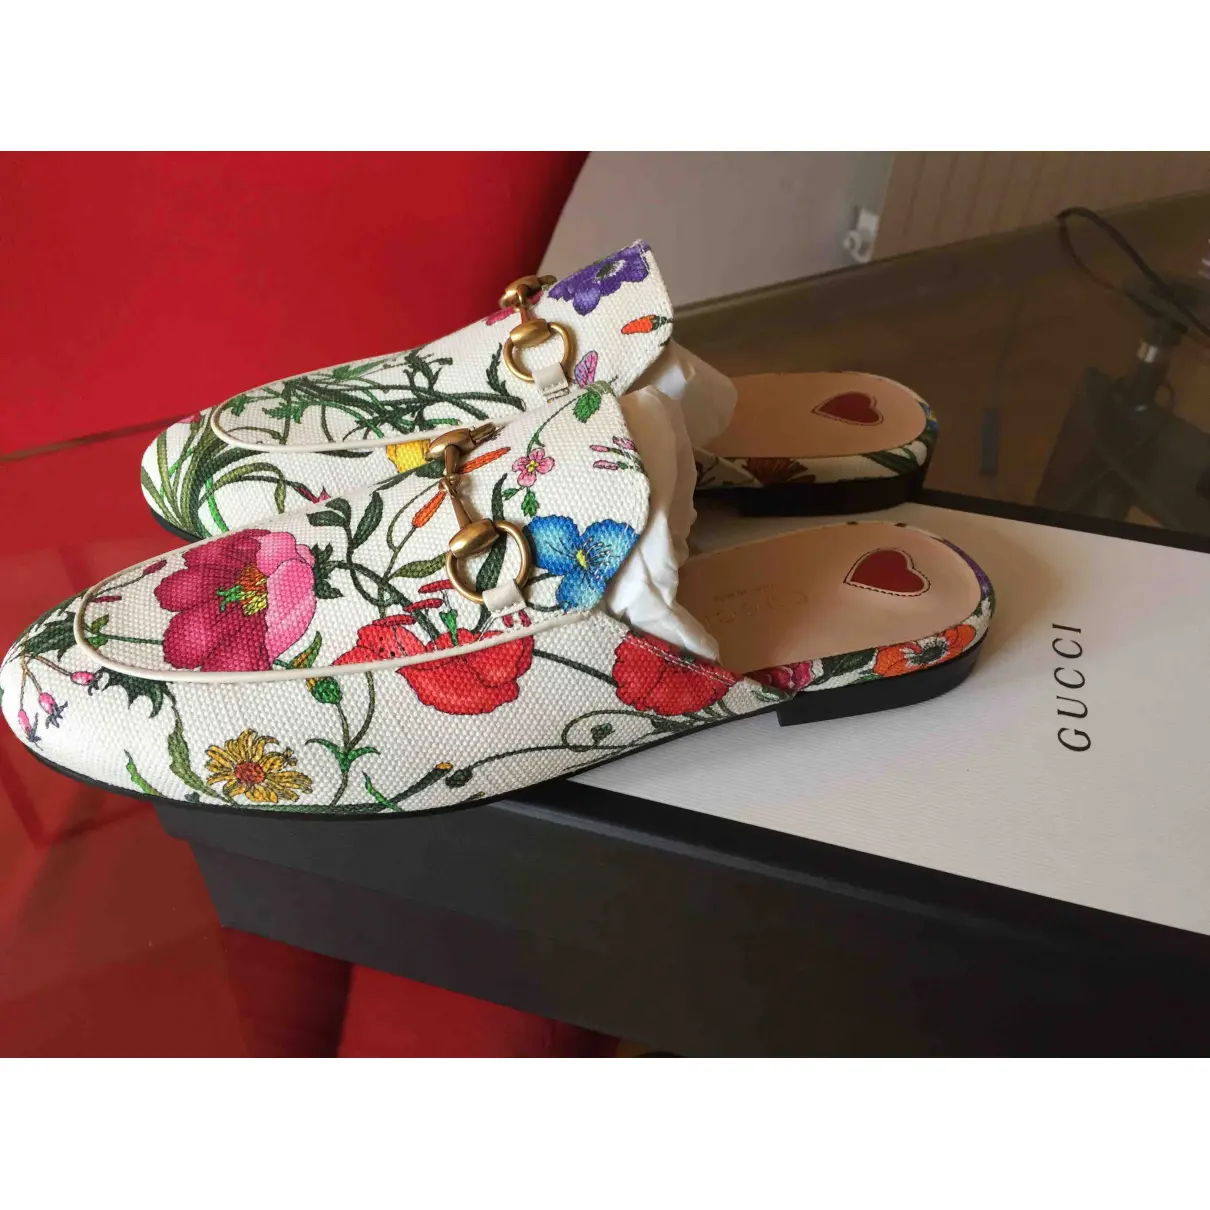 Buy Gucci Princetown leather flats online